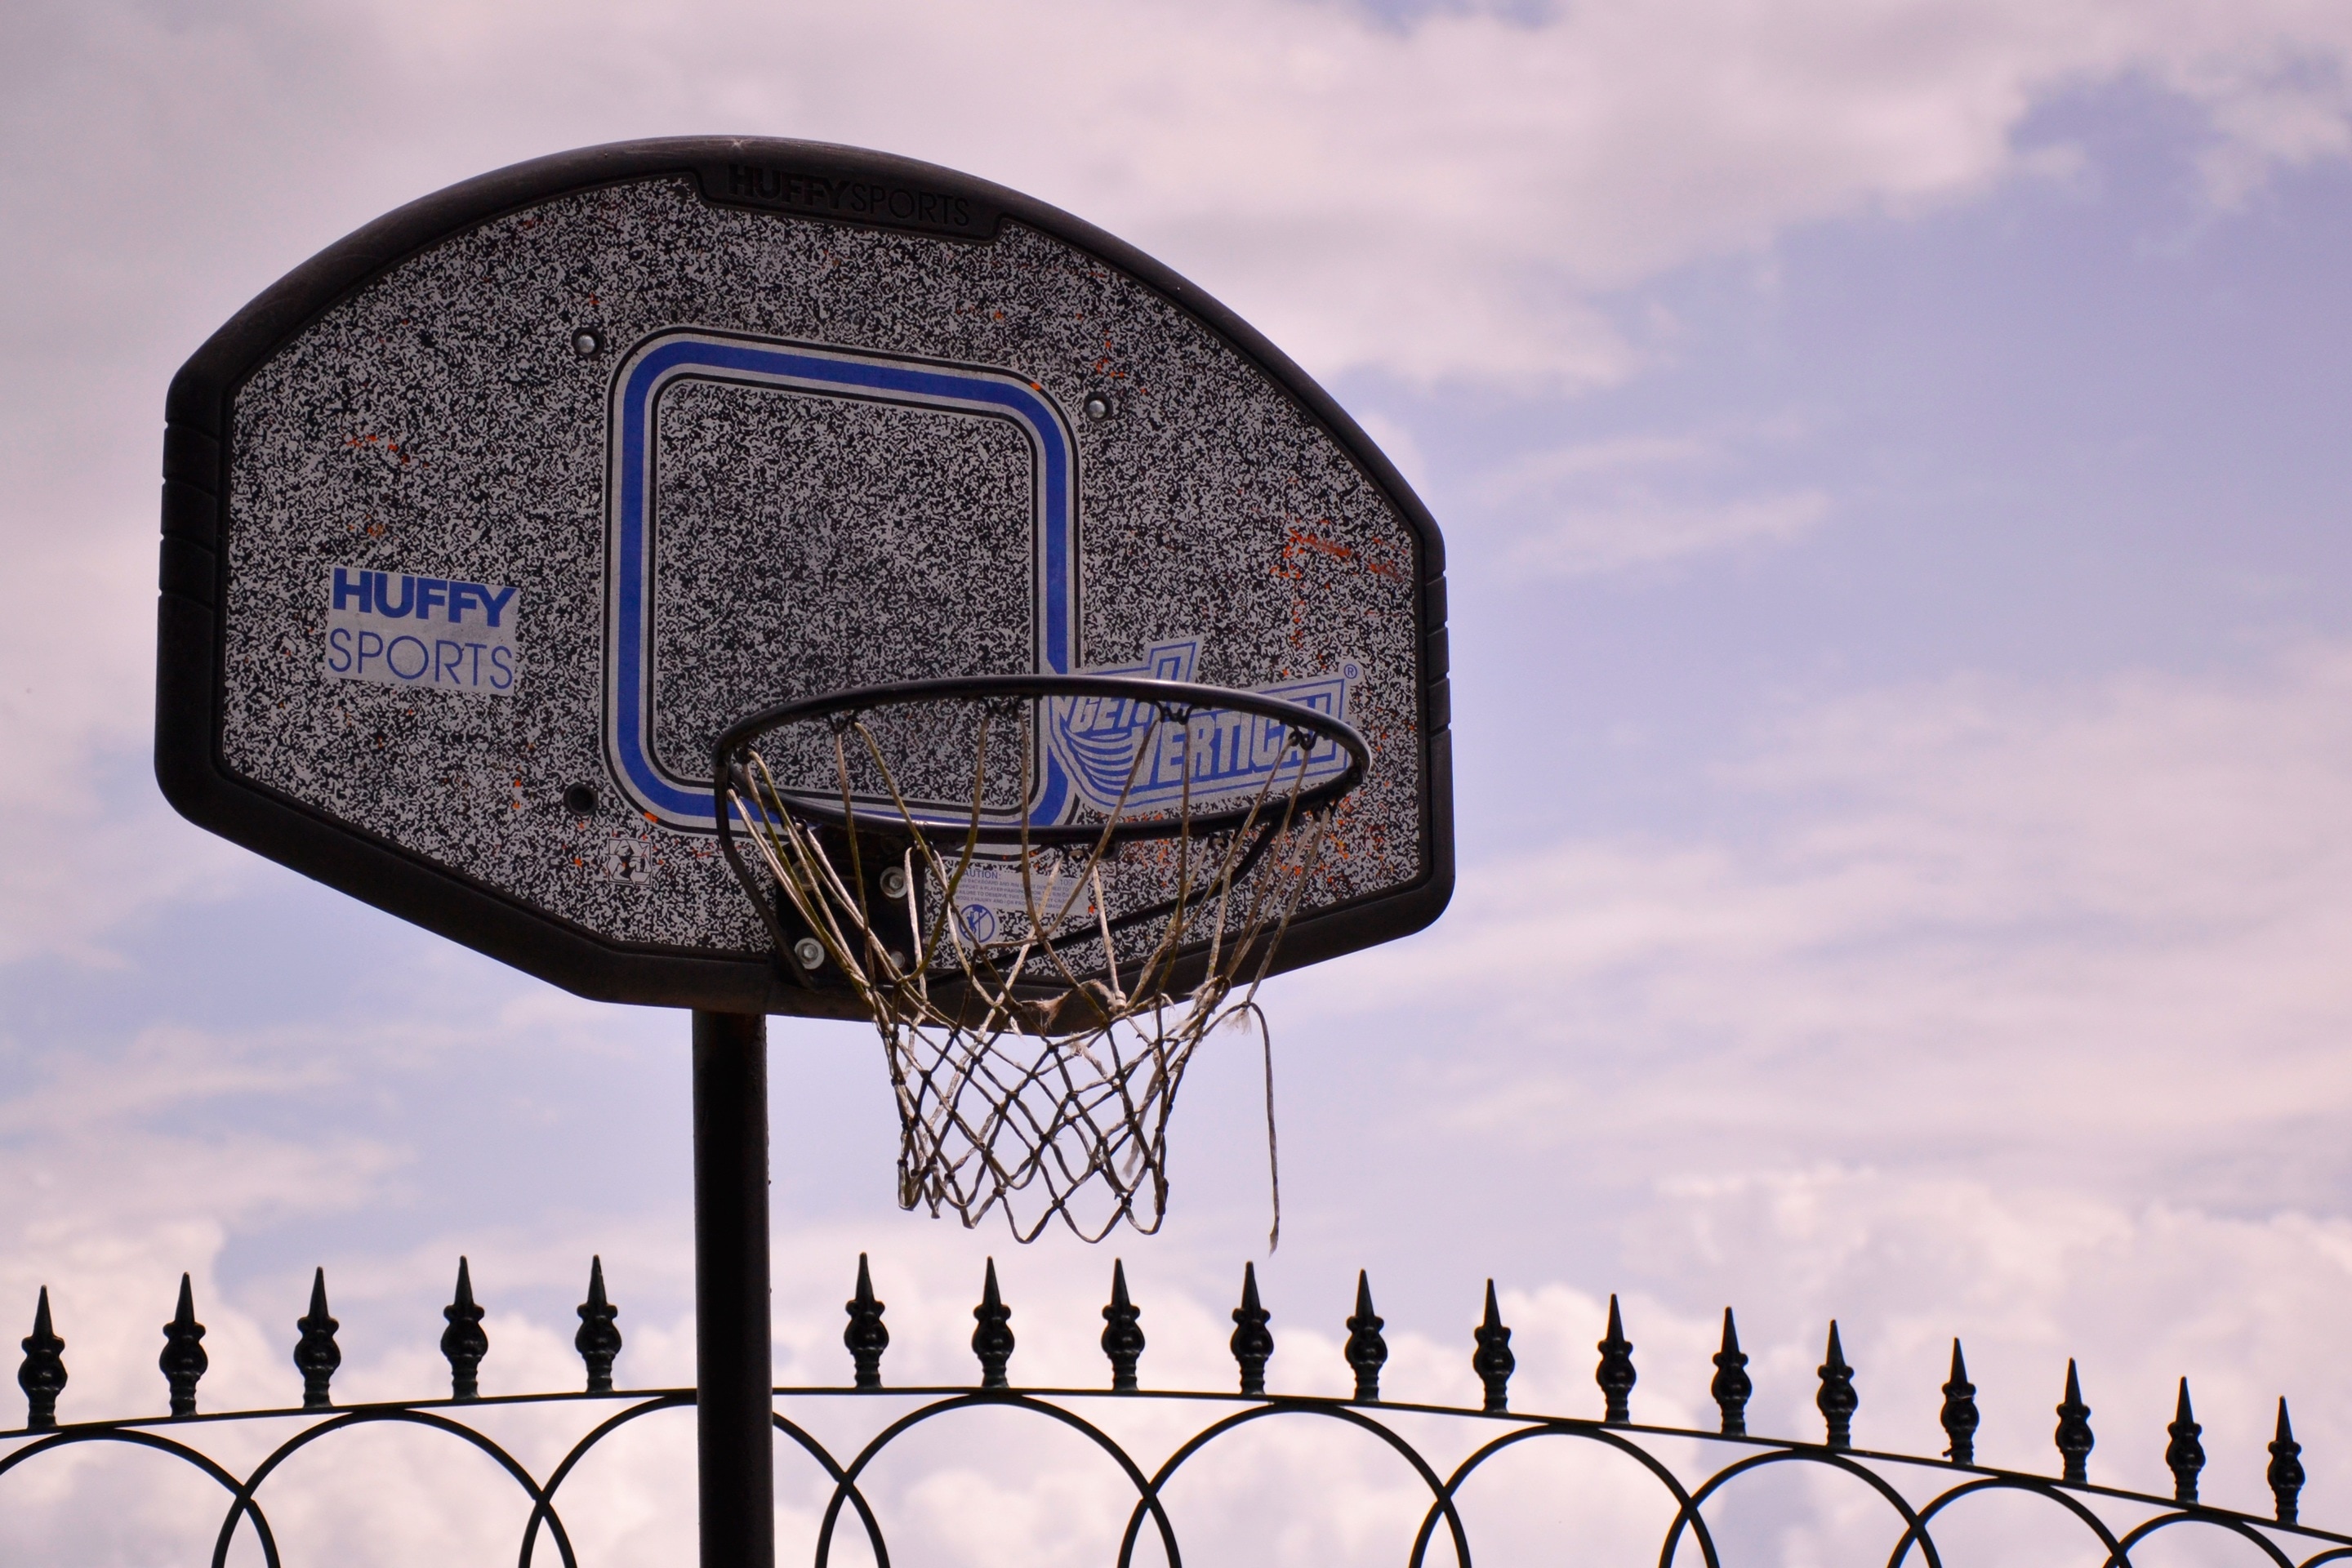 grey and blue basketball system near black metal fence'